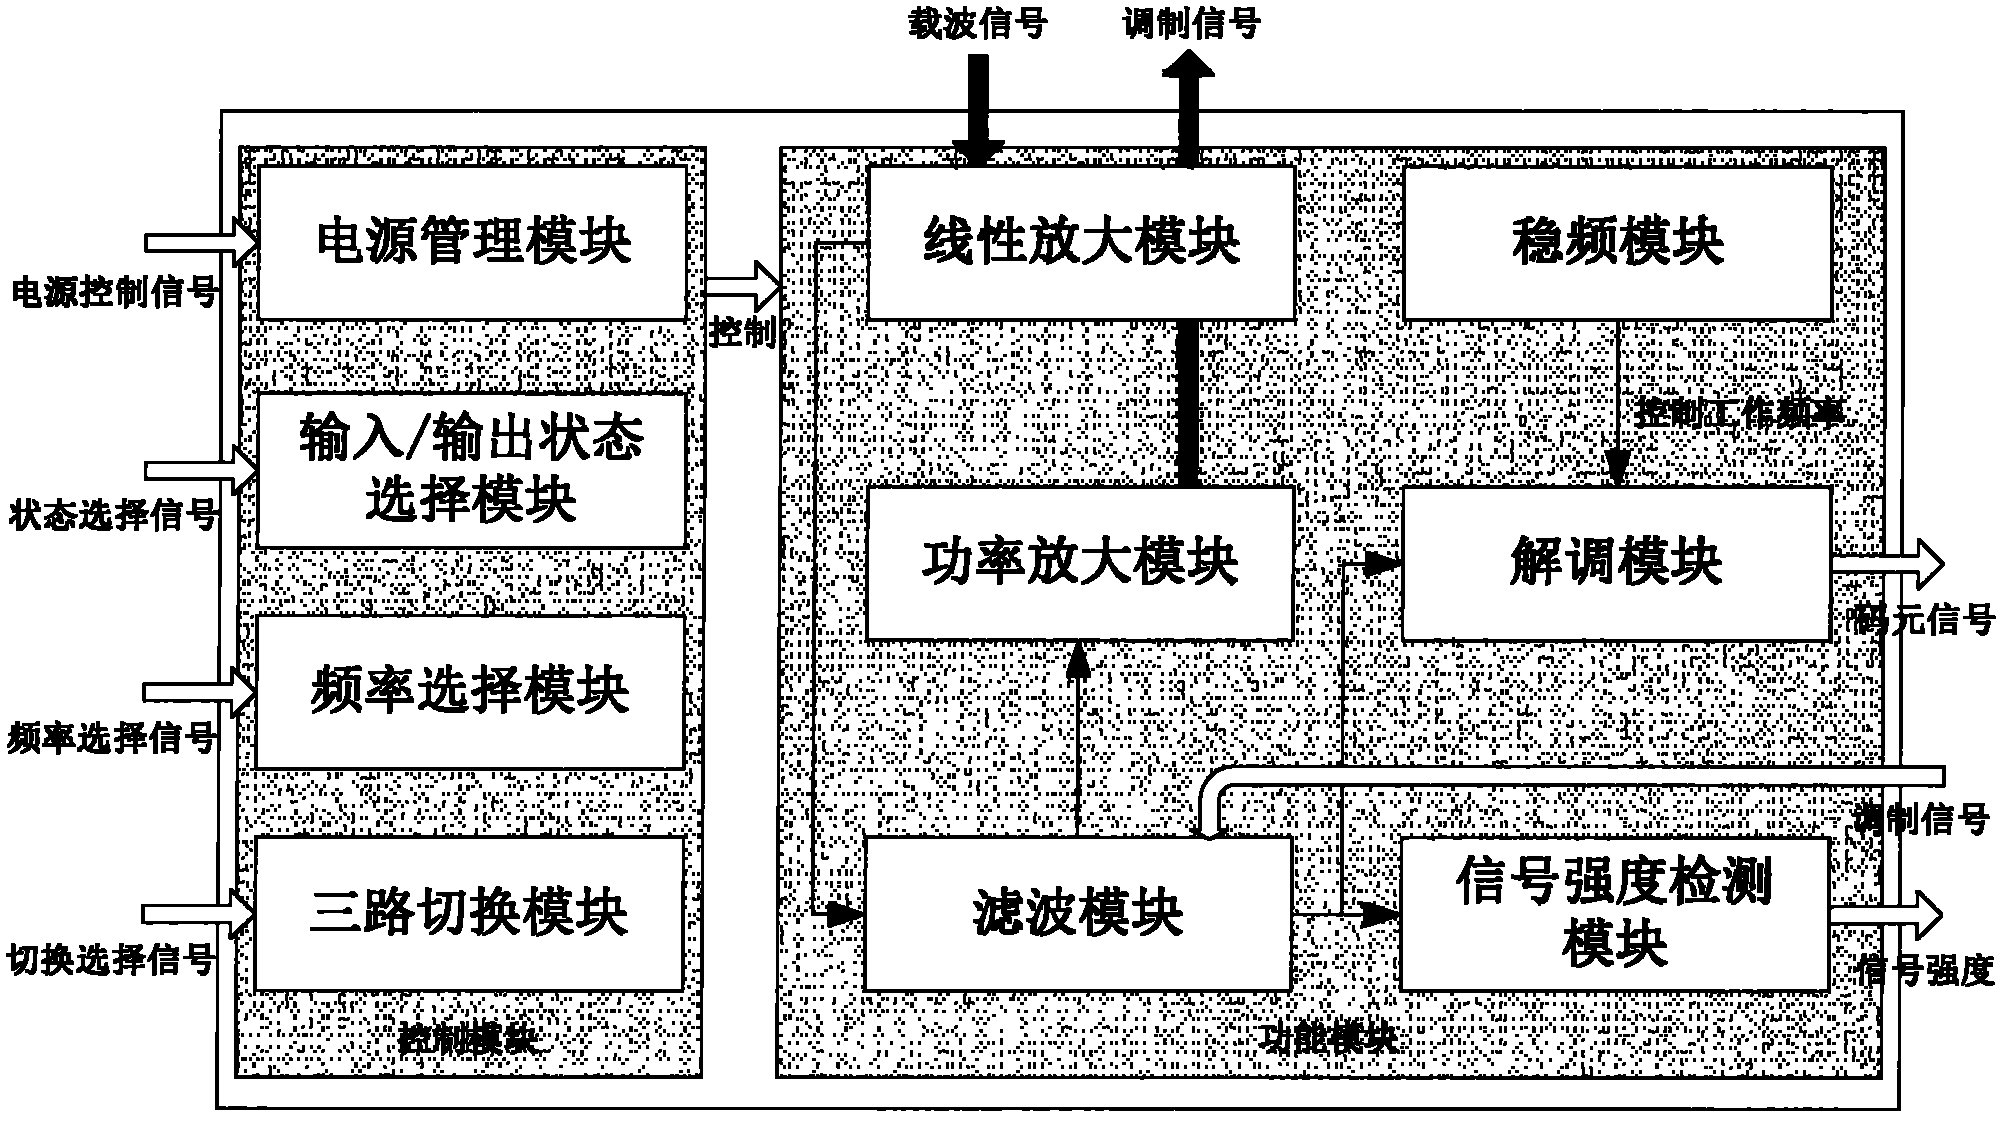 ASIC (application-specific integrated circuit) chip applicable to low-voltage power line carrier communication